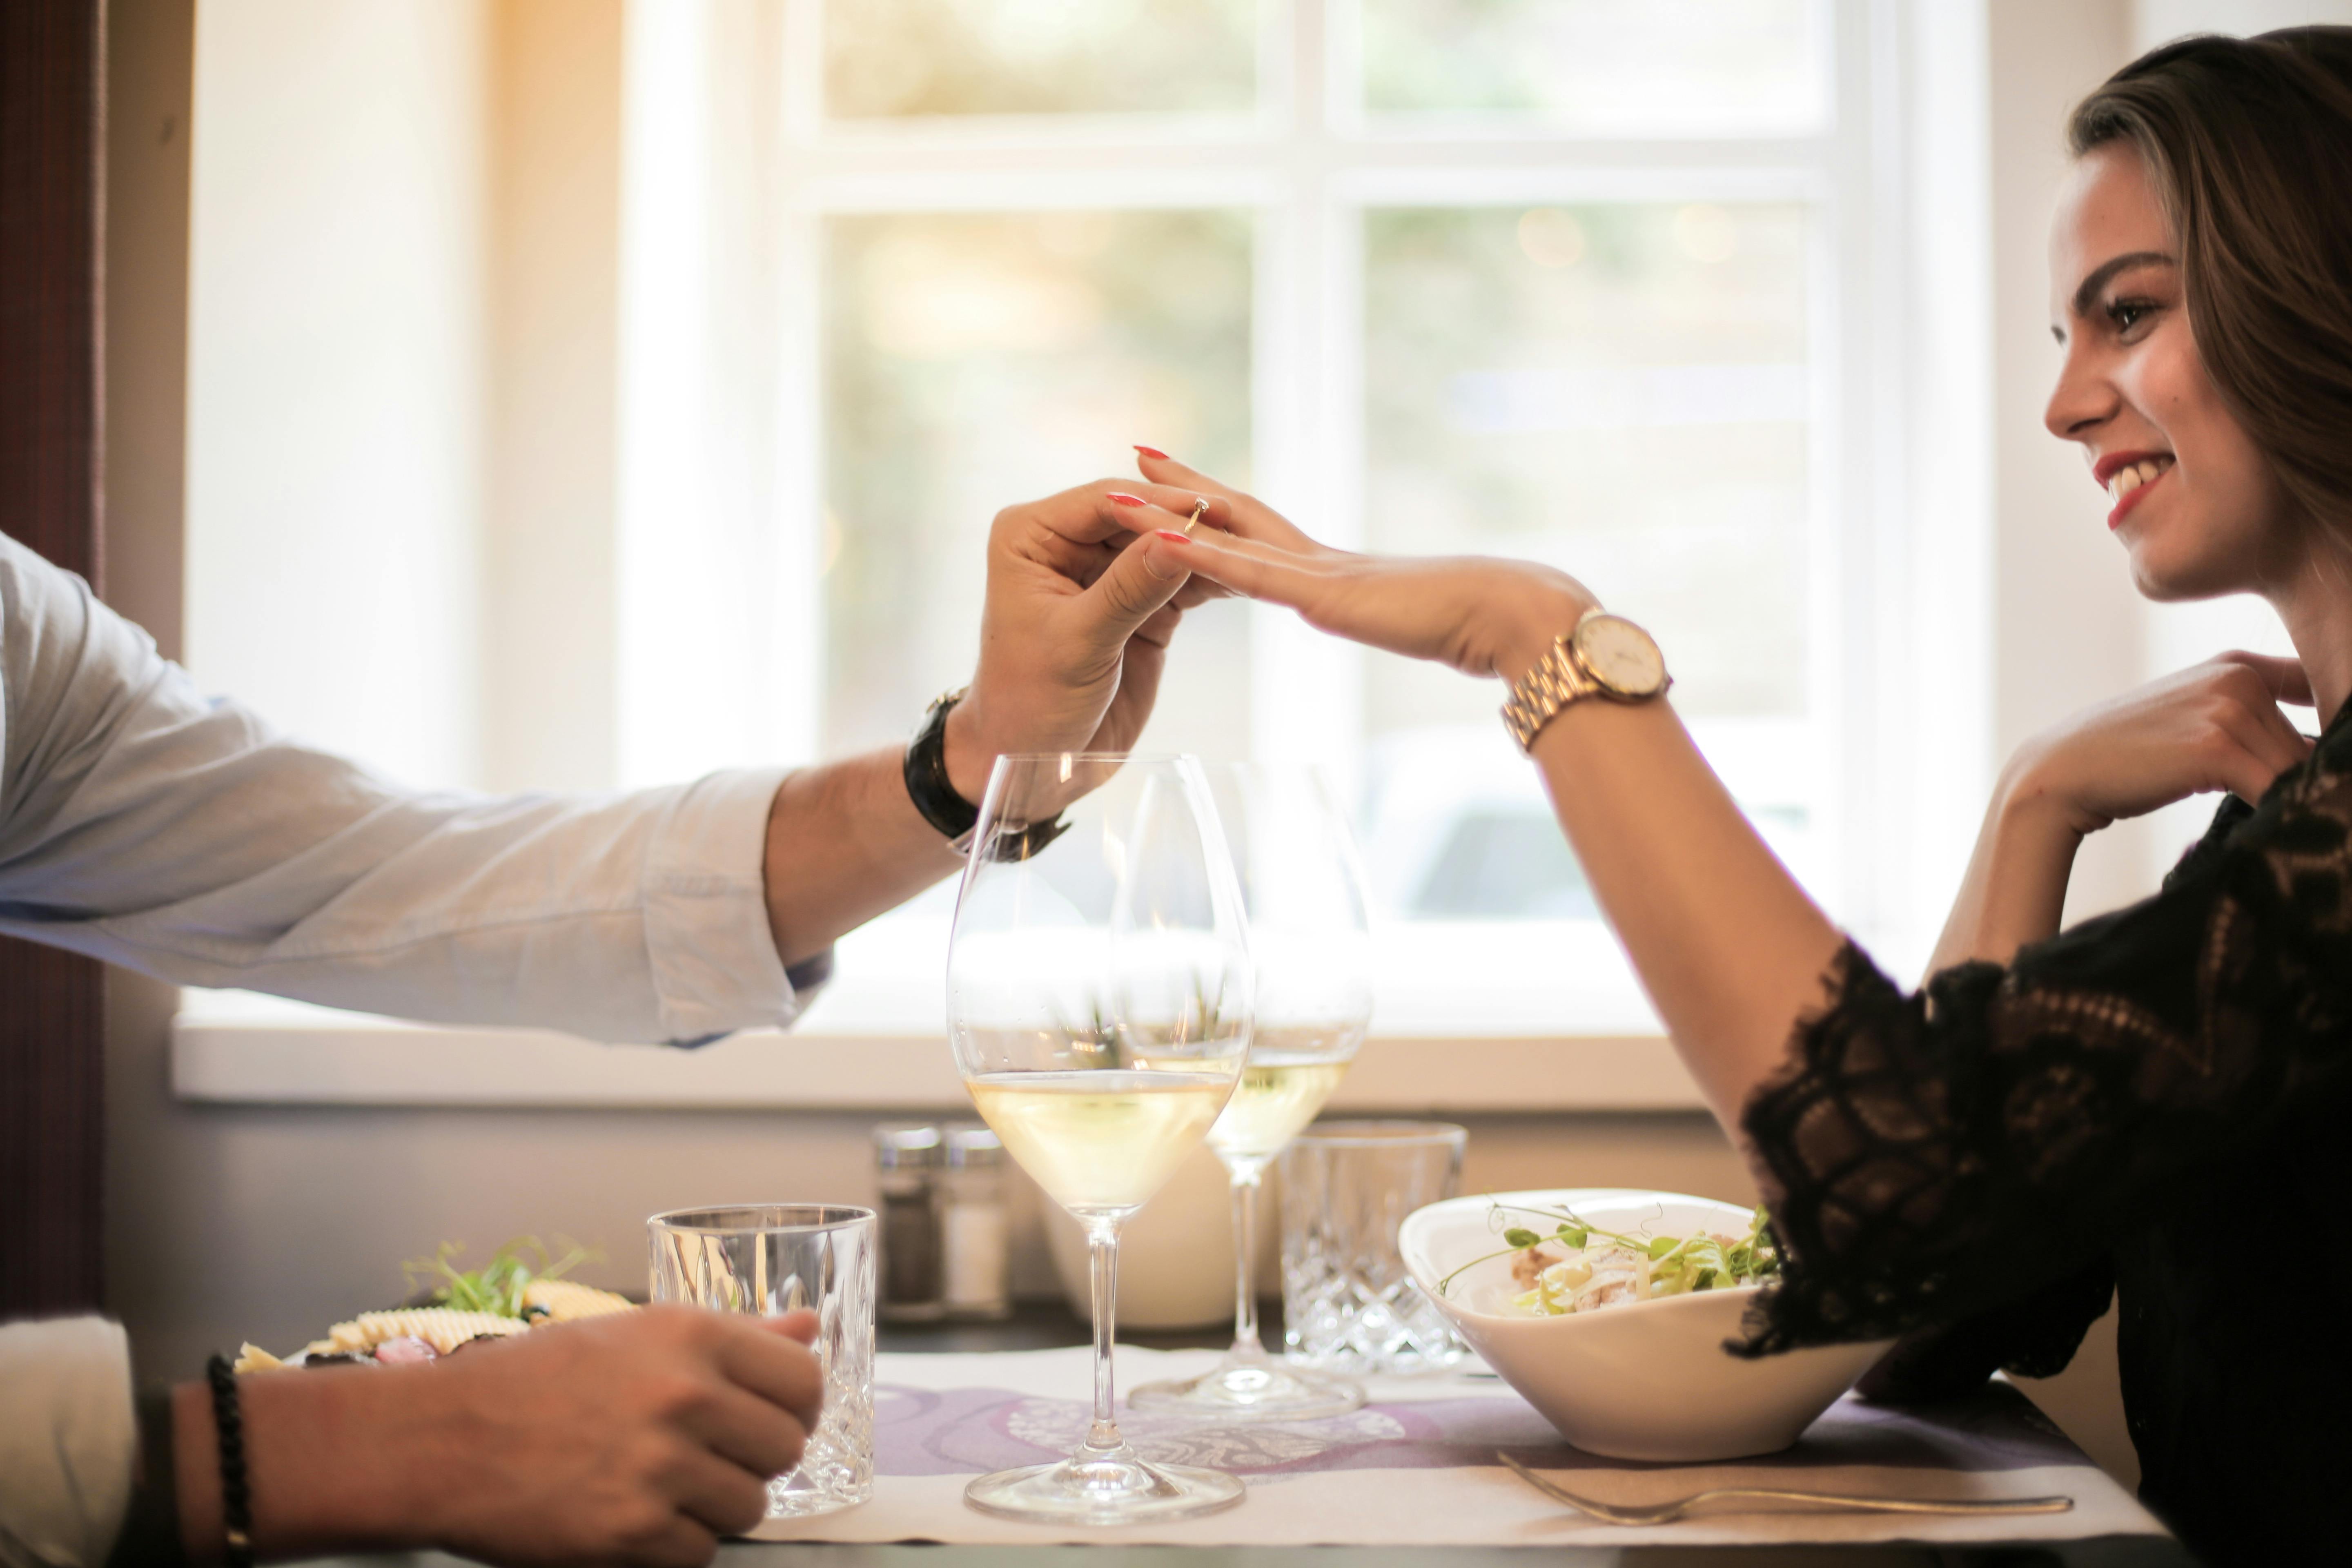 Man and woman dining | Source: Pexels